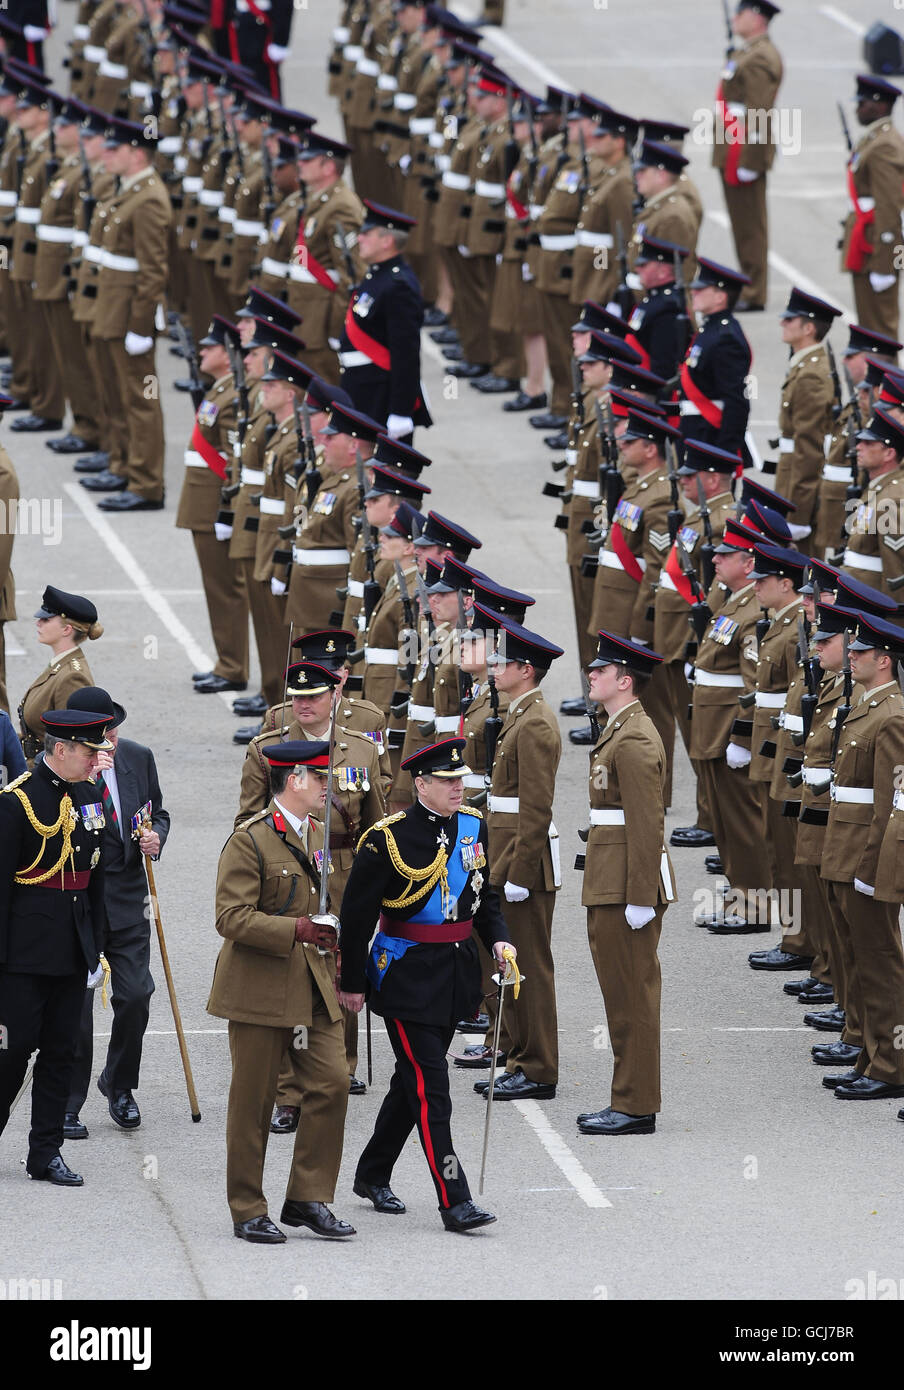 The Duke of York on a special parade to present new Regimental Colours to soldiers of the Yorkshire Regiment on the Parade Ground at Imphal Barracks, York. The presentation will bring together the three regular Battalions and one Territorial Battalion for the first time since they were formed on June 6, 2006. PRESS ASSOCIATION Photo. Picture date: Friday June 18, 2010. The Duke is the Colonel in Chief to the Regiment. See PA story ROYAL Colours. Photo credit should read: John Giles/PA Wire Stock Photo